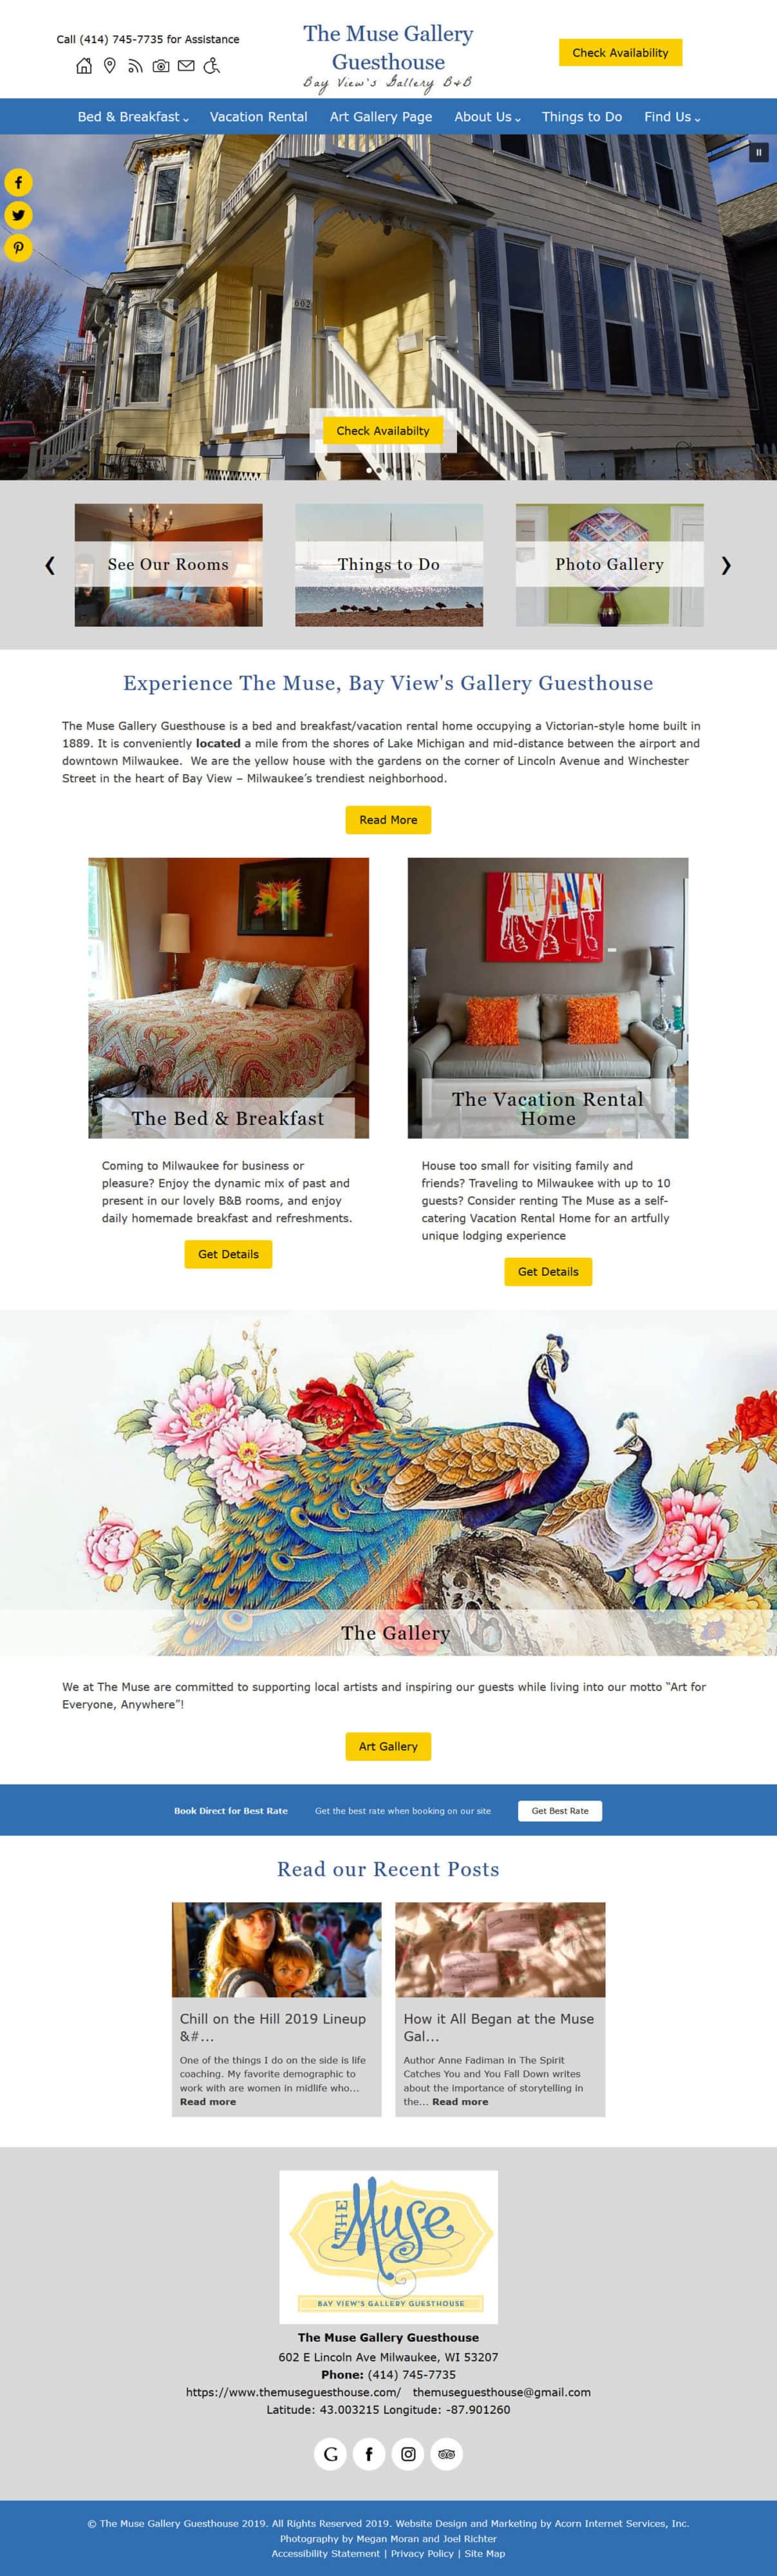 Home page screenshot of The Muse Gallery Guesthouse - Standard